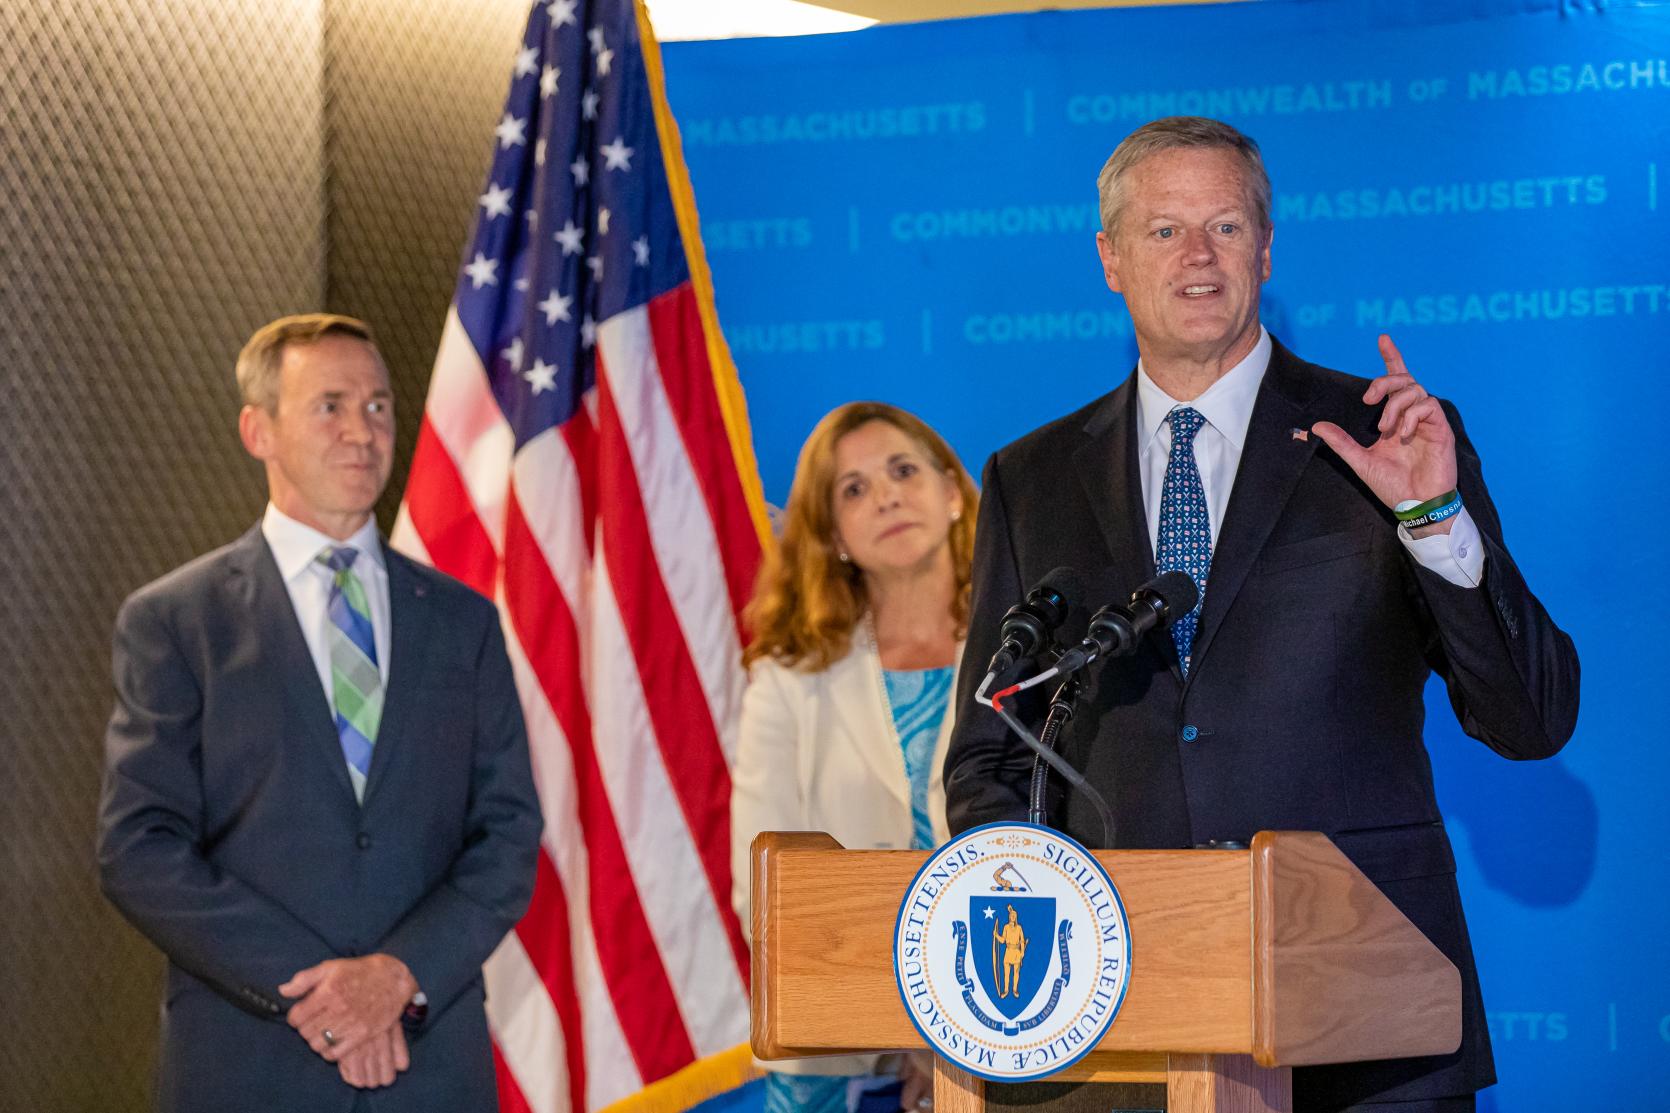 Baker-Polito Administration Announces New Federal Grant for Massachusetts Apprenticeships, Promotes Further Job-Training Investments 